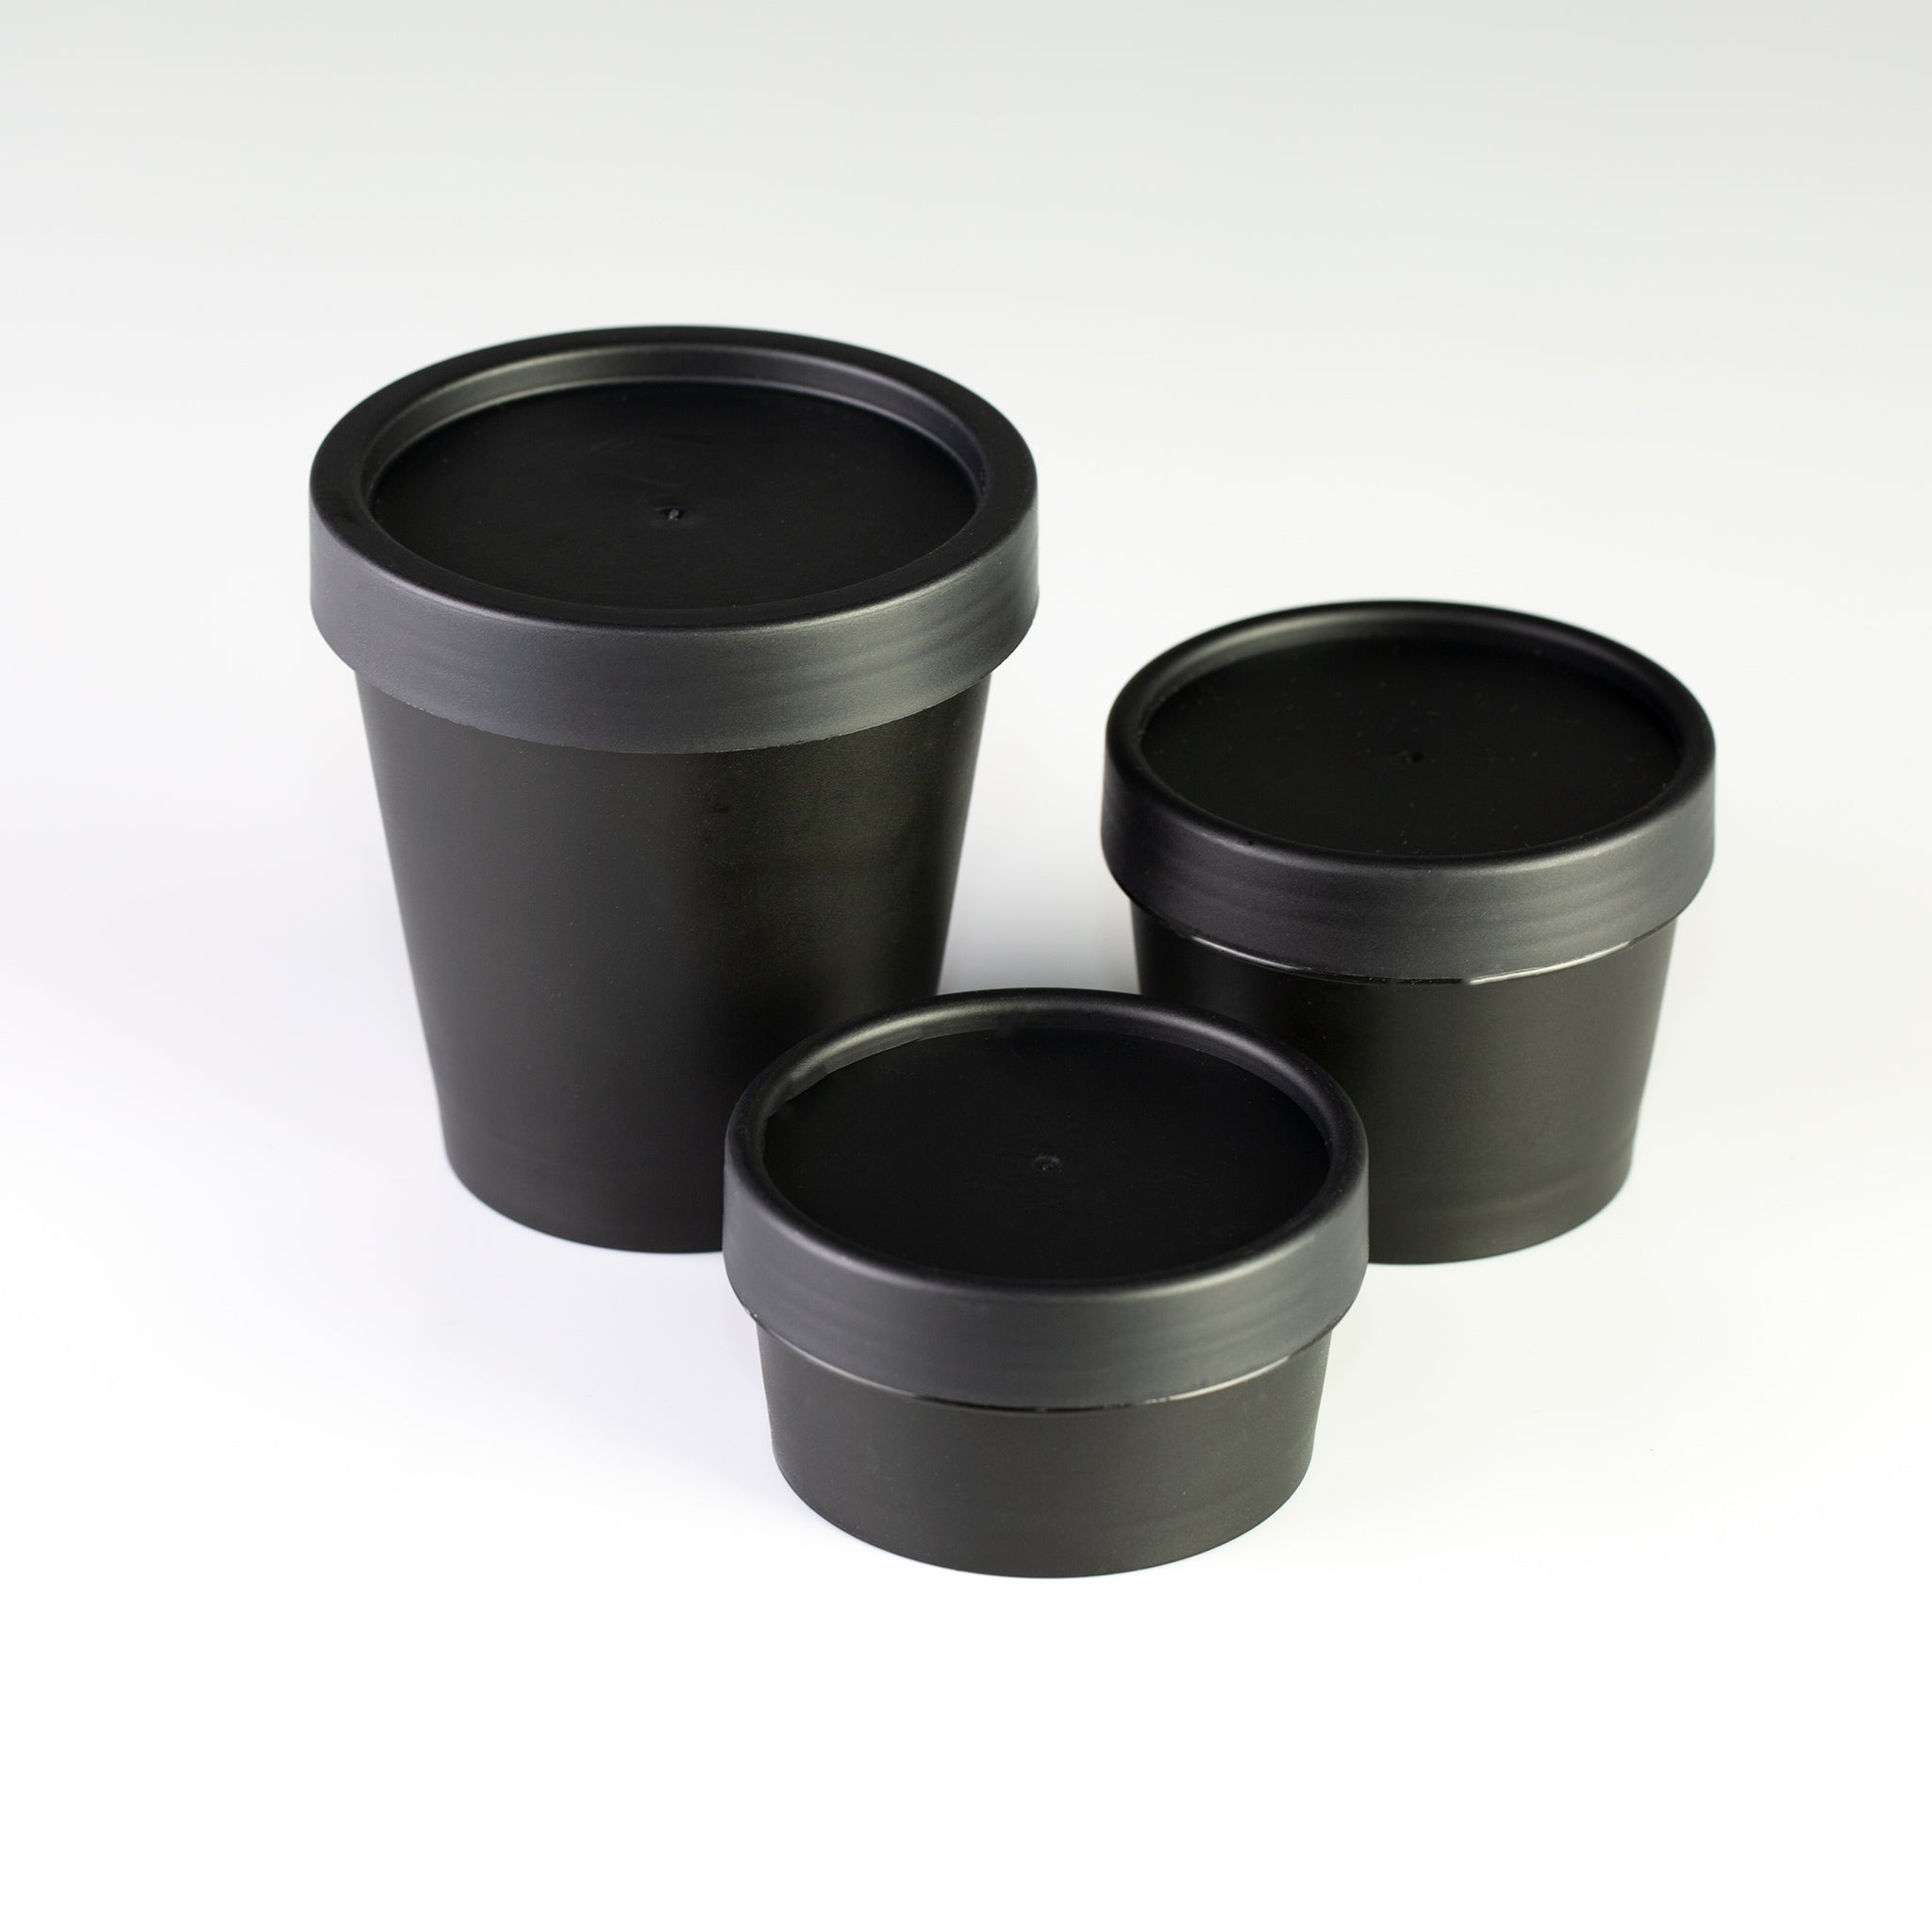 3.4 oz (100ml) Black Cosmetic Pot with Lid